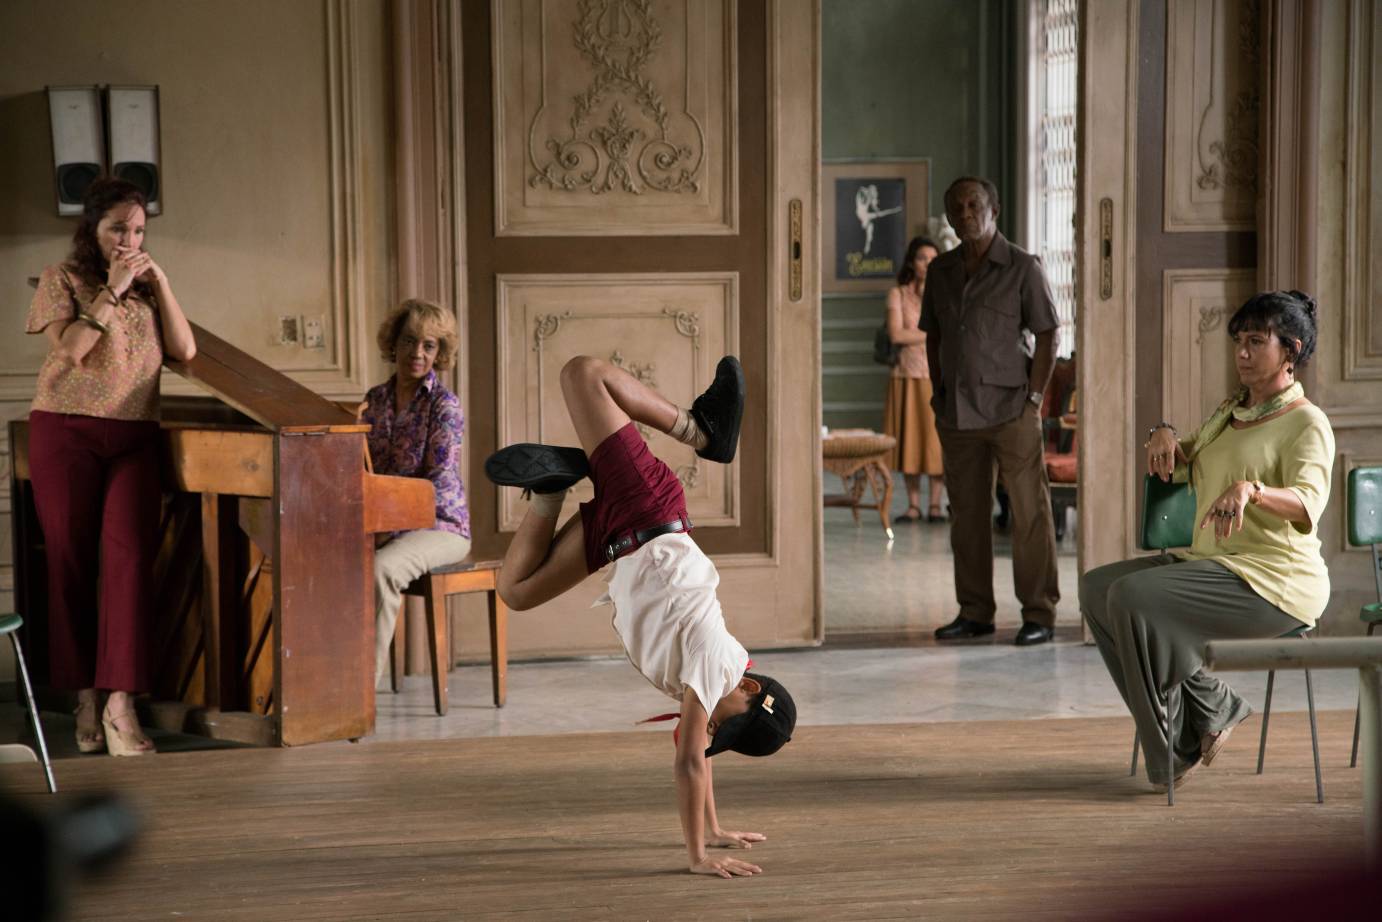 Carlos Acosta breakdancing in front of people in the movie version of his life